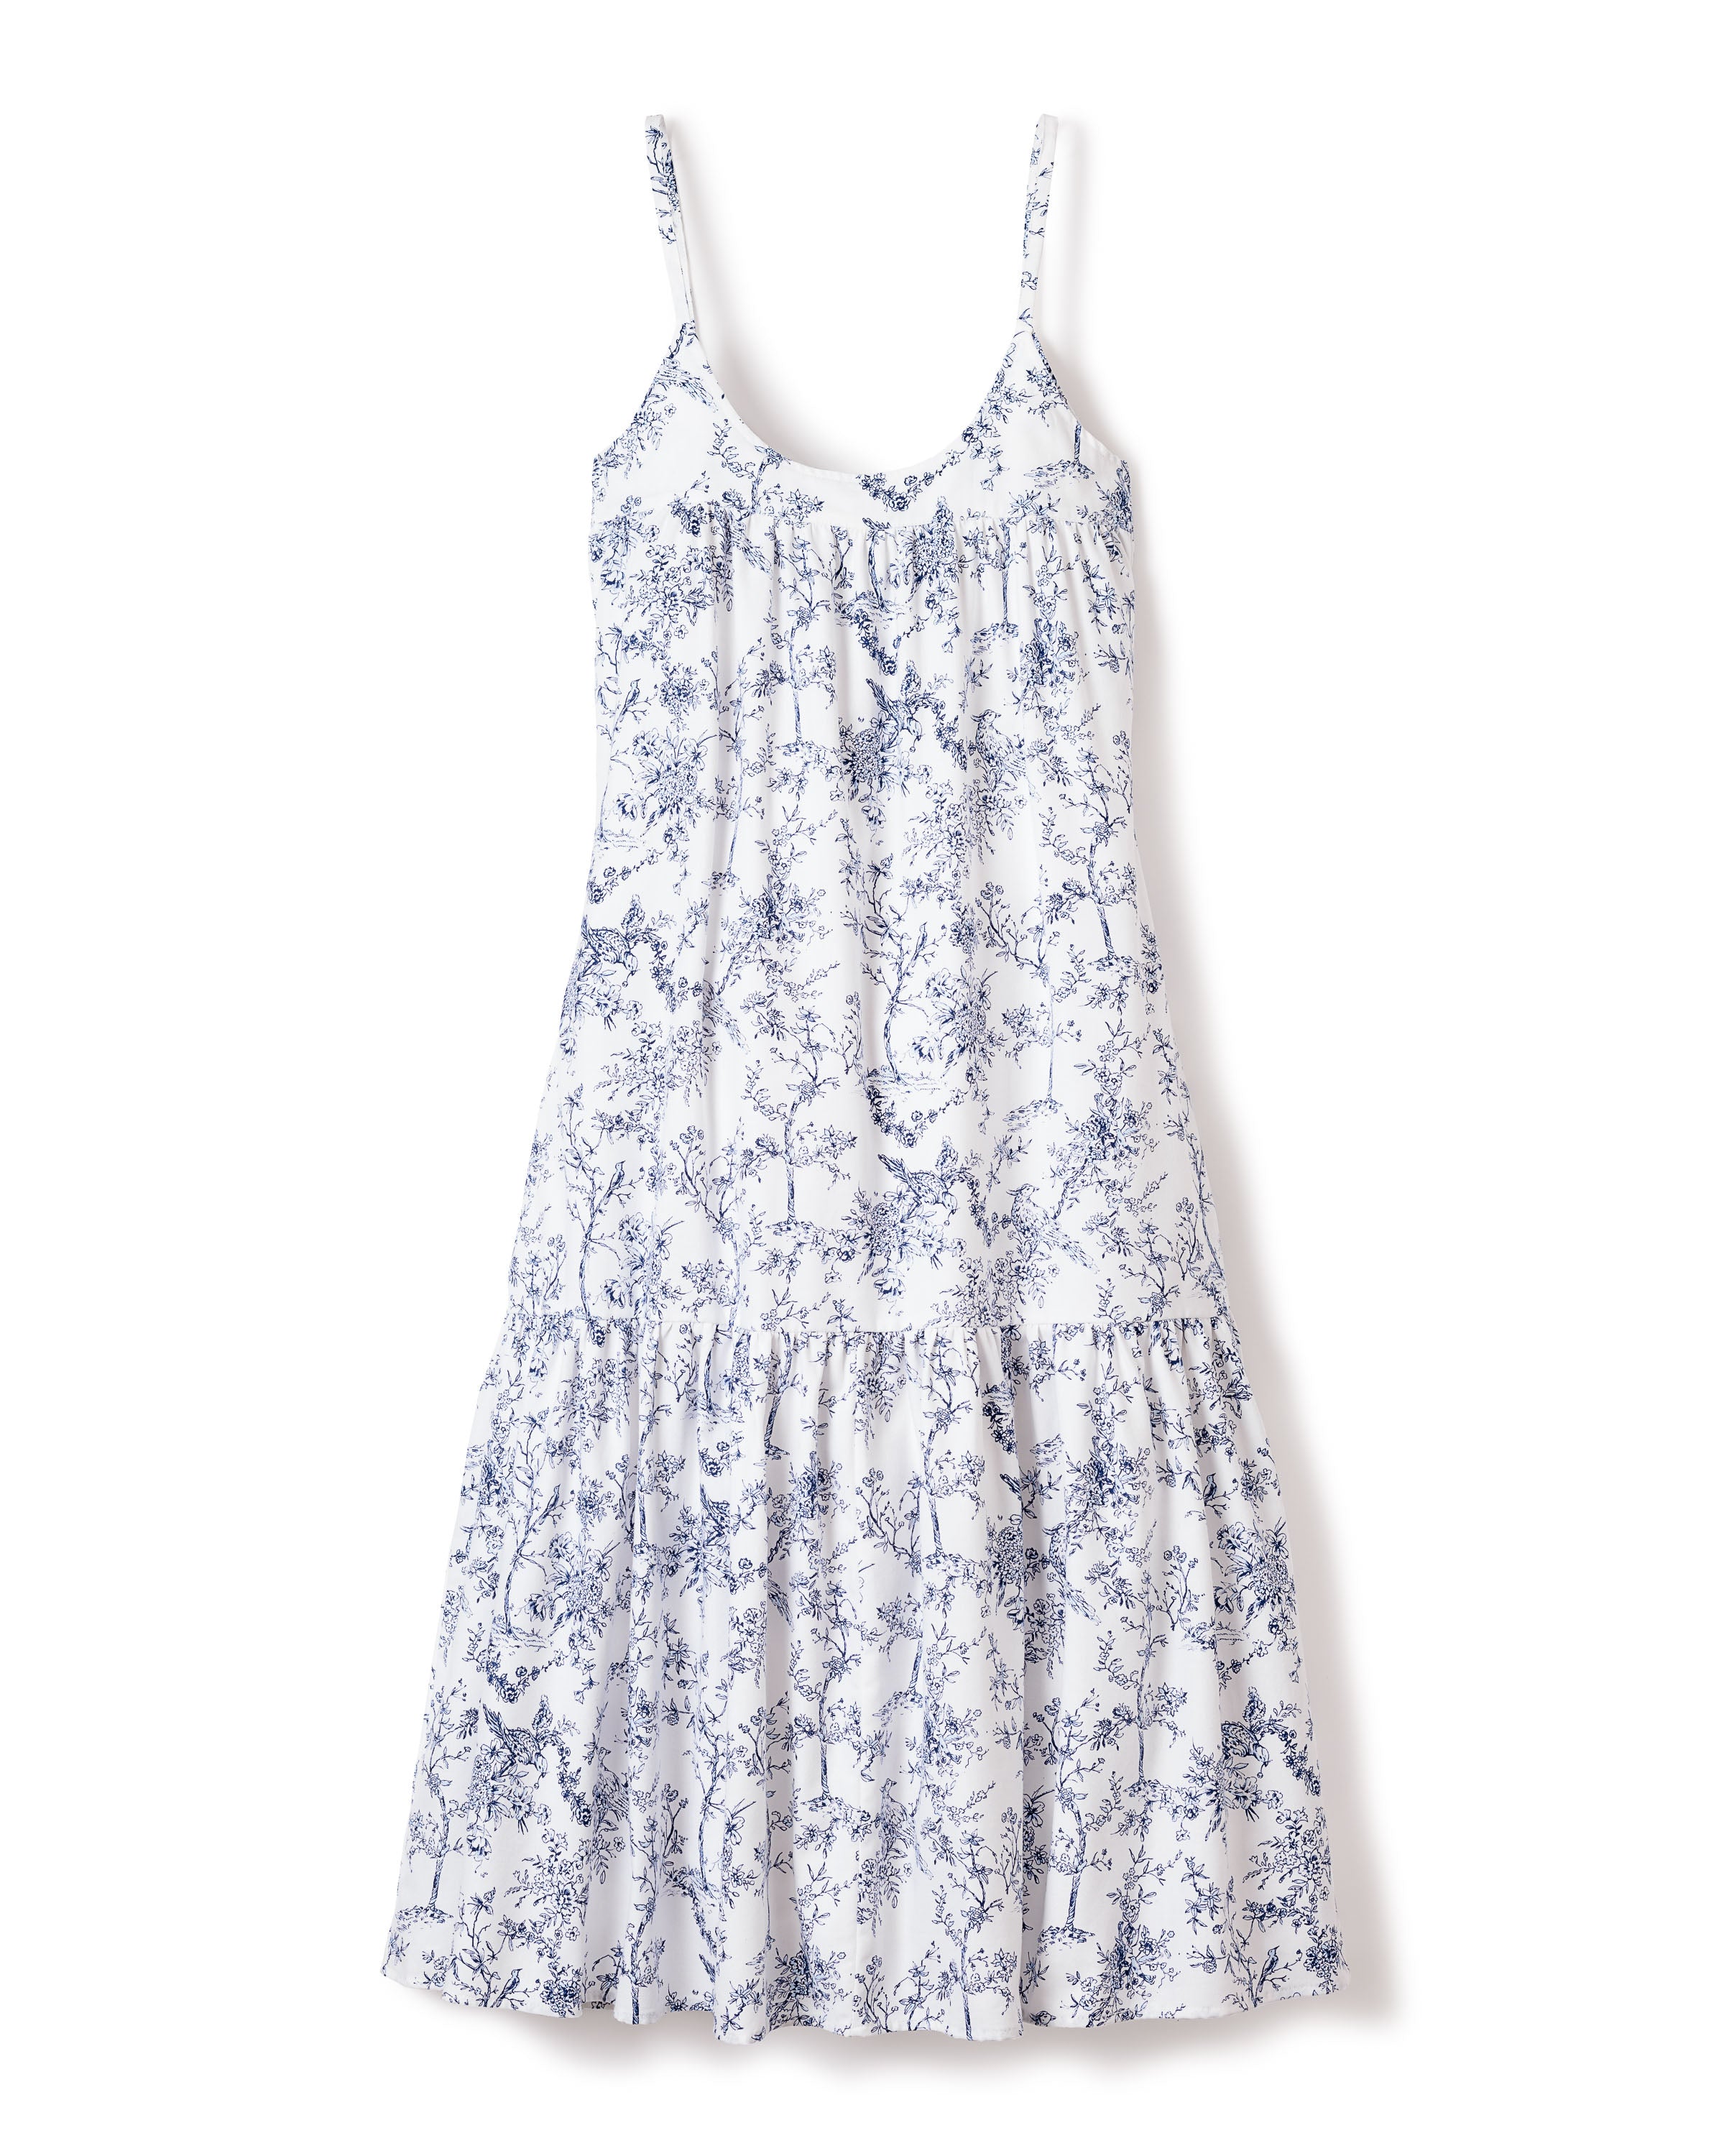 Women's Twill Chloé Nightgown in Timeless Toile